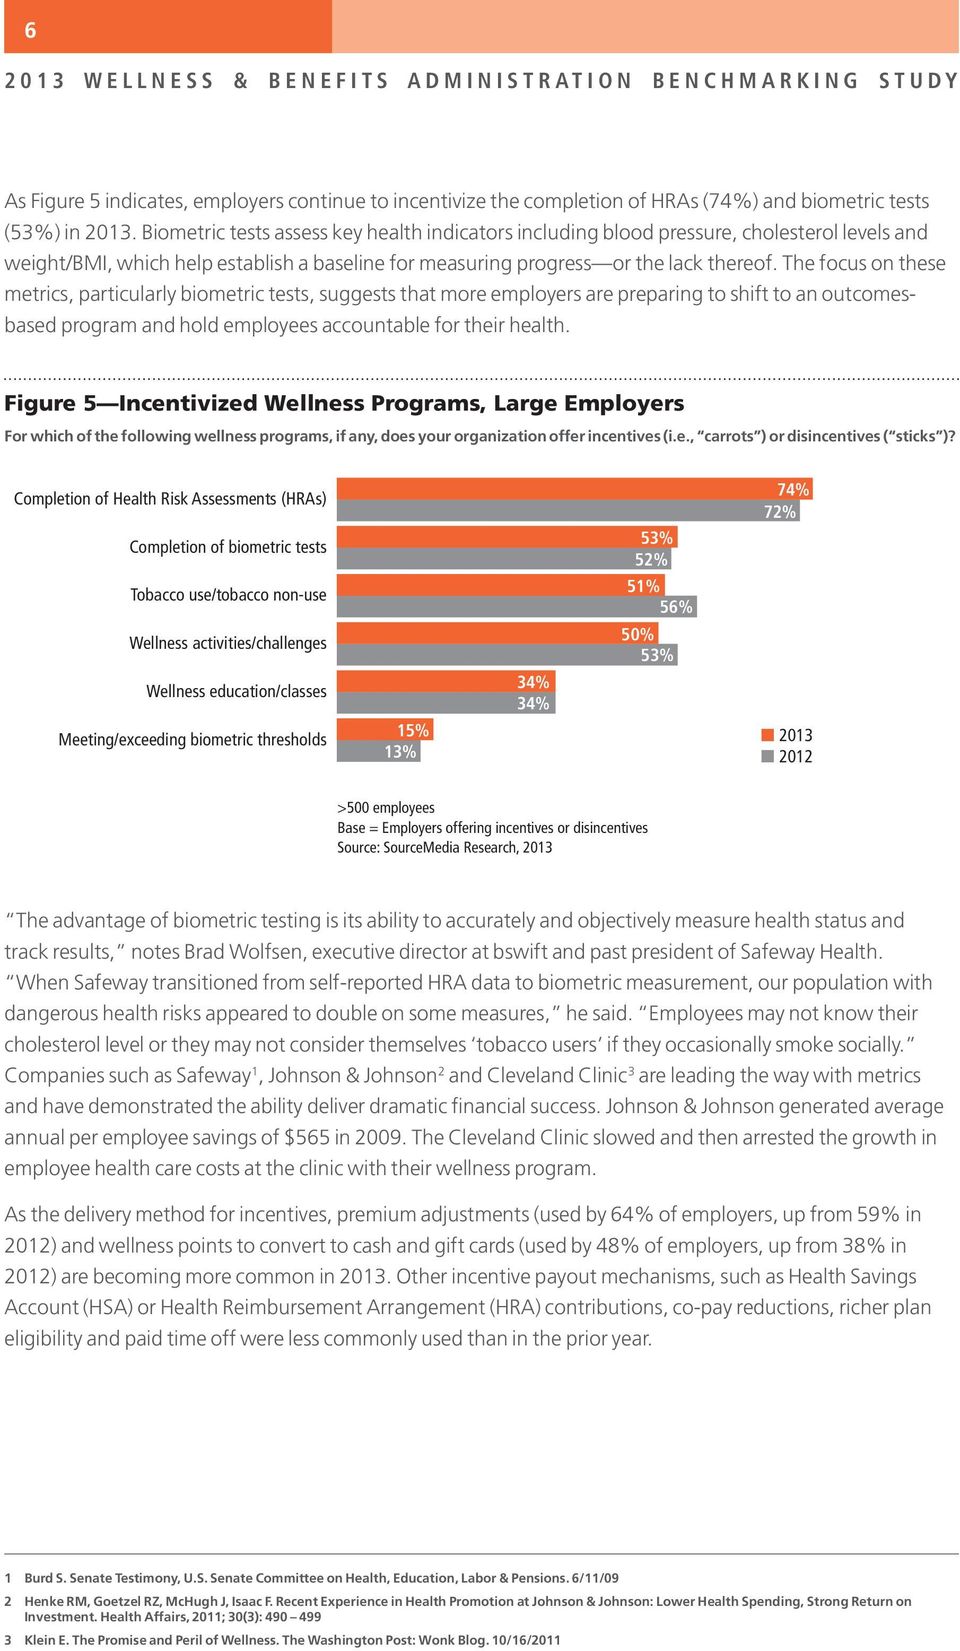 The focus on these metrics, particularly biometric tests, suggests that more employers are preparing to shift to an outcomesbased program and hold employees accountable for their health.